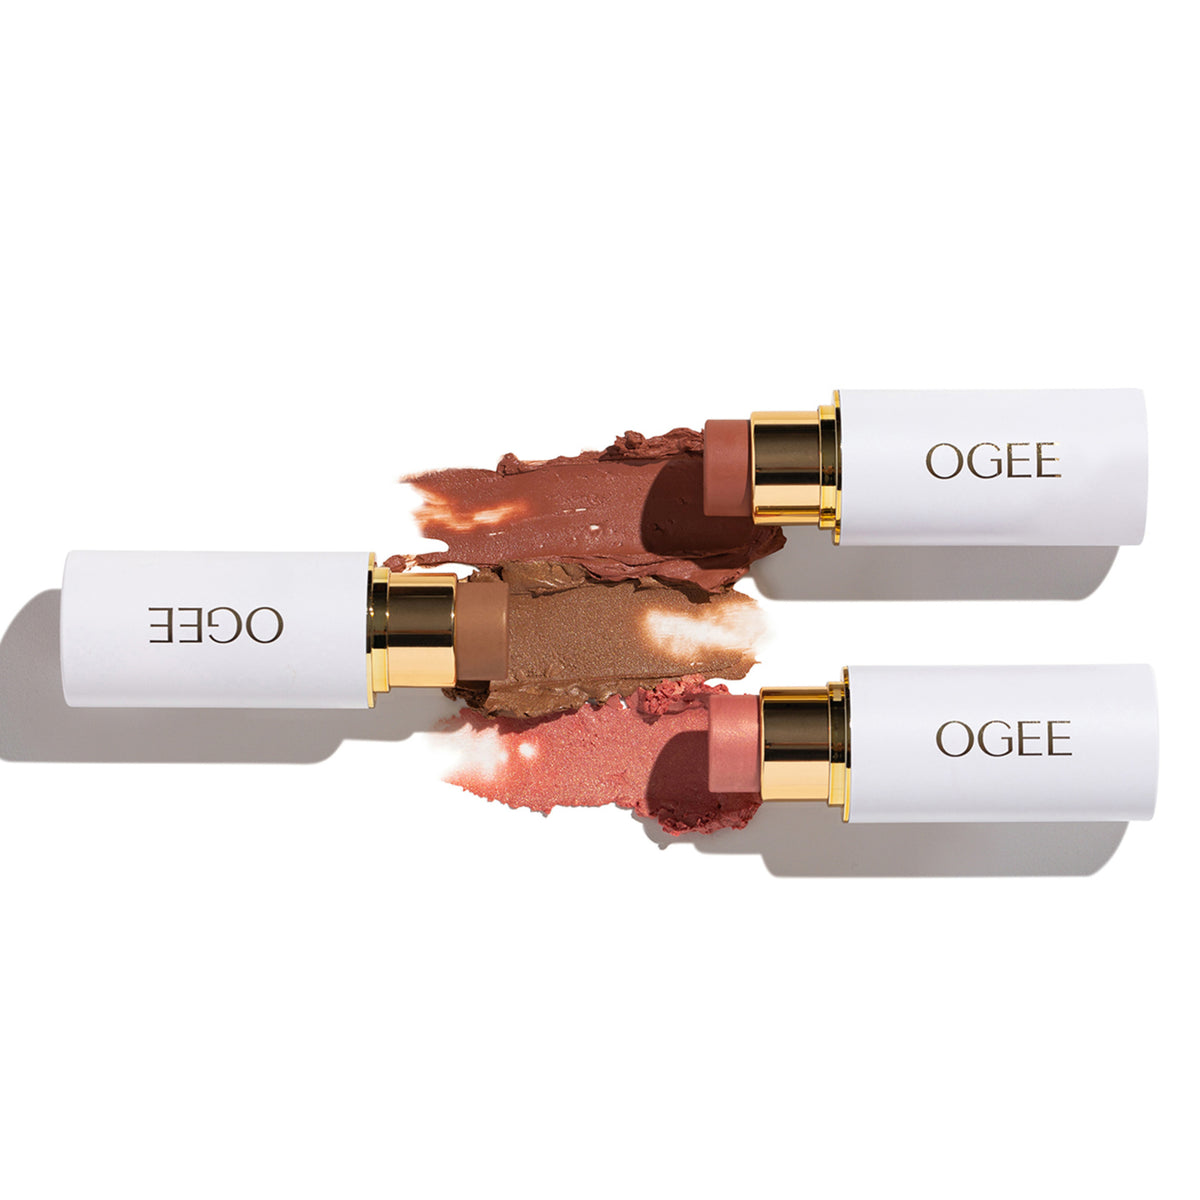 NEW! Contour Collection Quiz - Ogee